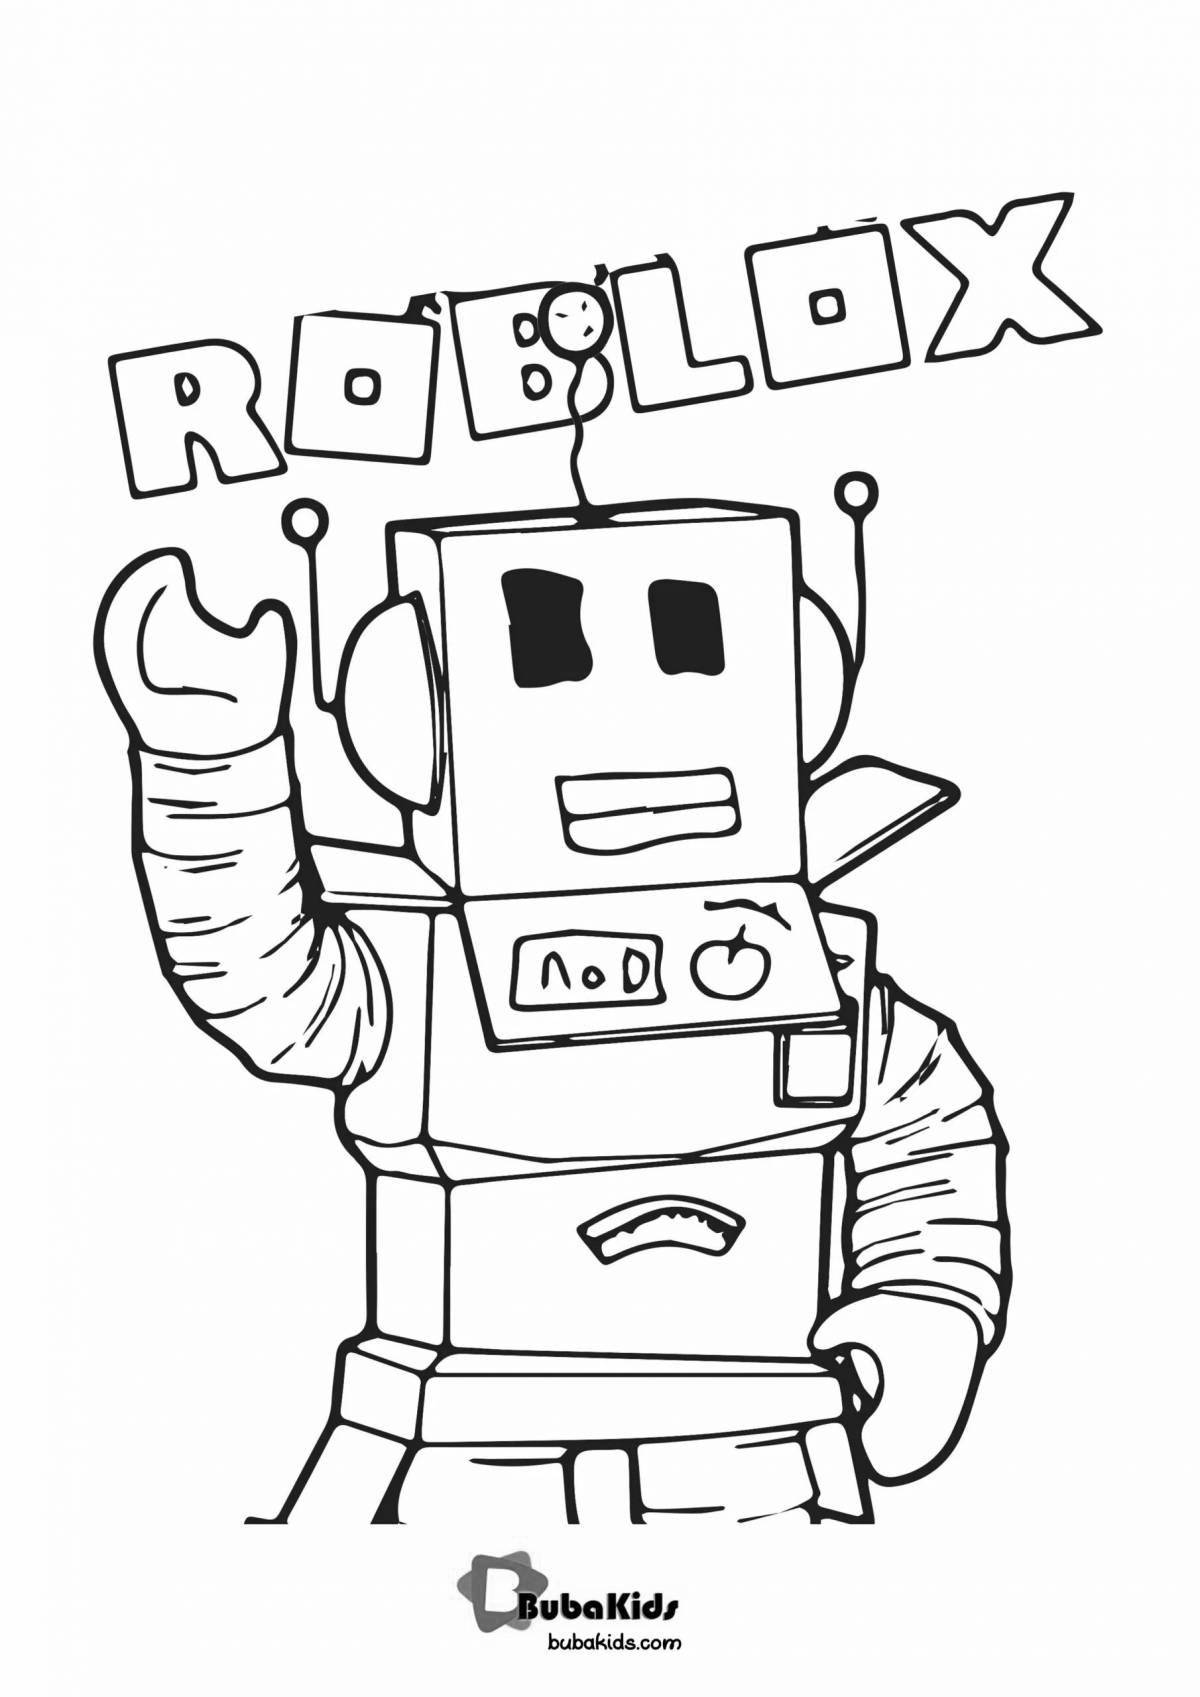 Awesome roblox queen coloring page